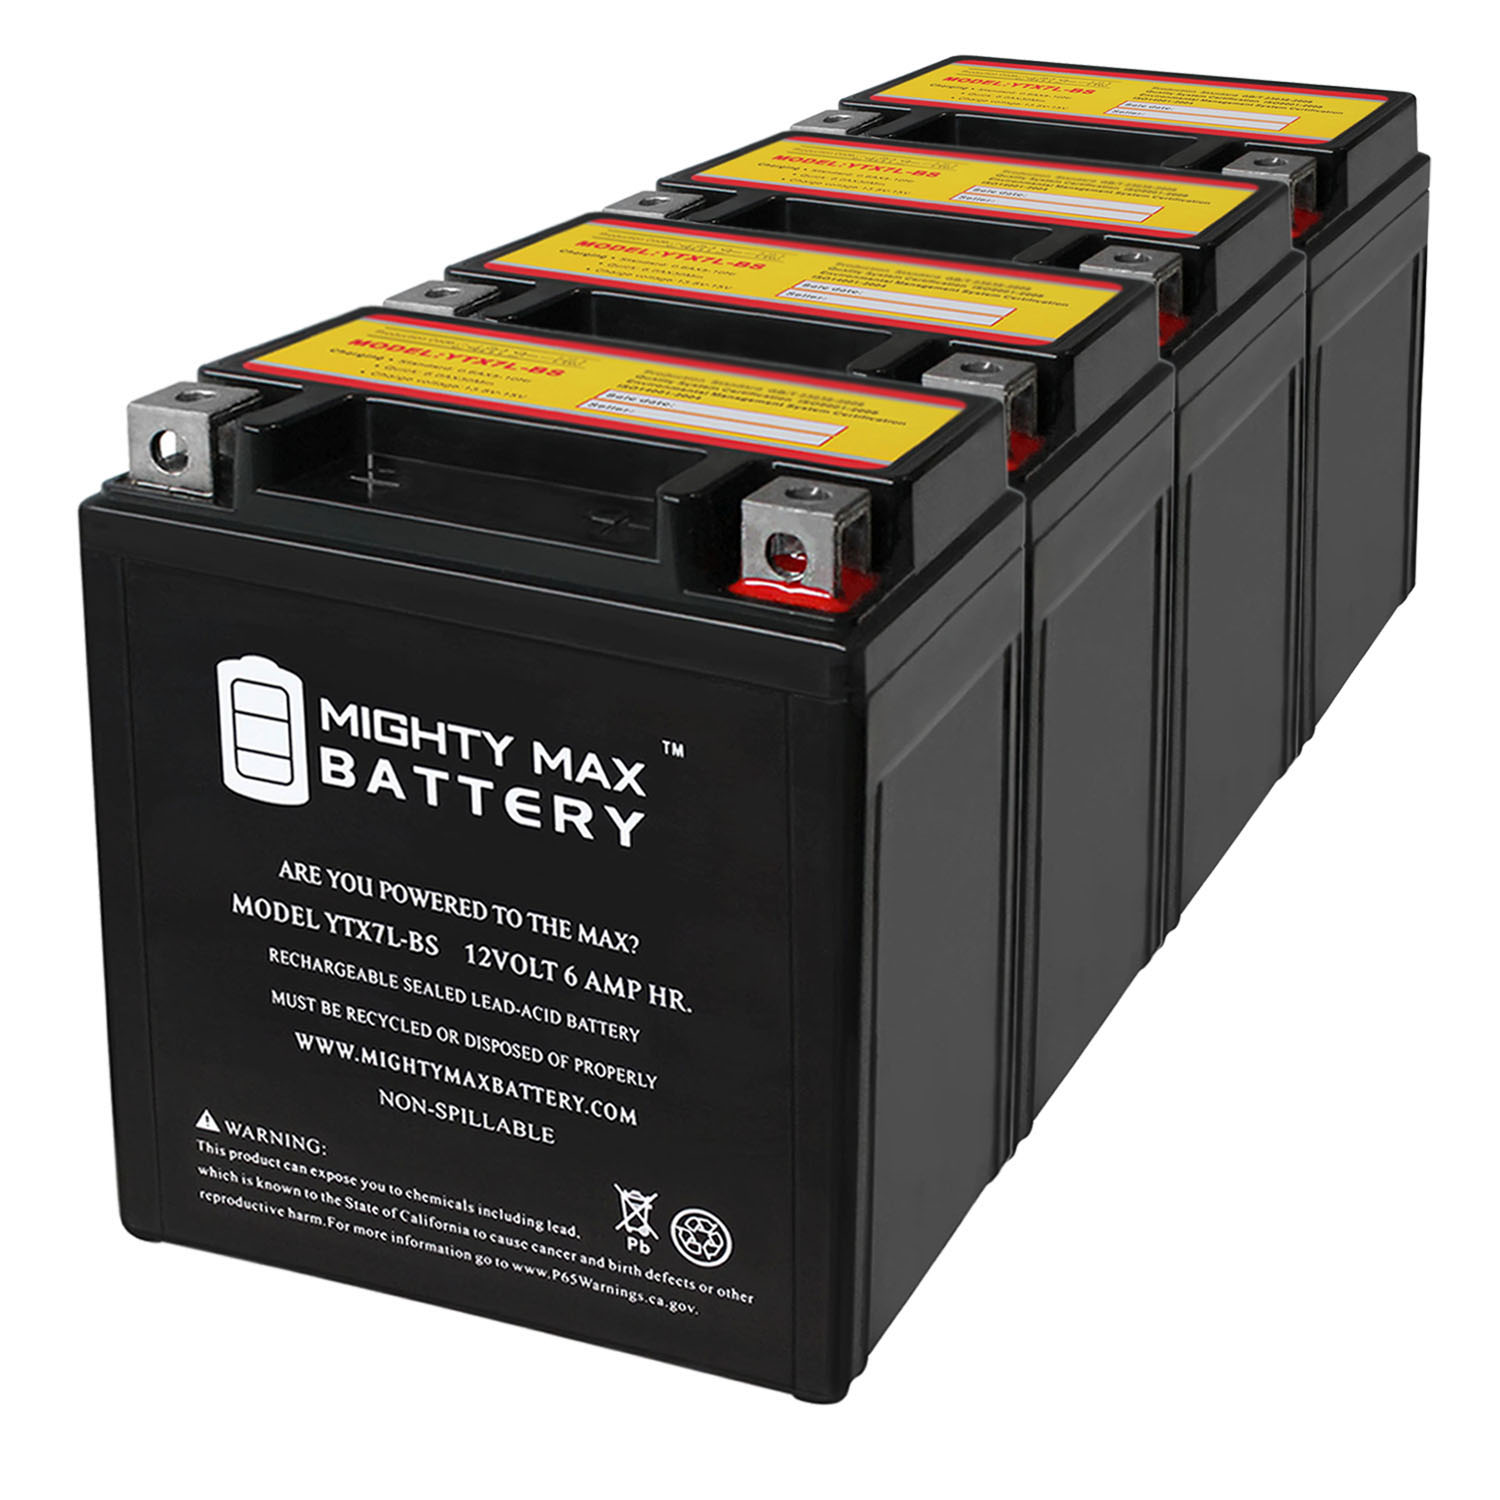 YTX7L-BS 12V 6Ah Replacement Battery Compatible with UltraMax YTX7L-BS - 4 Pack